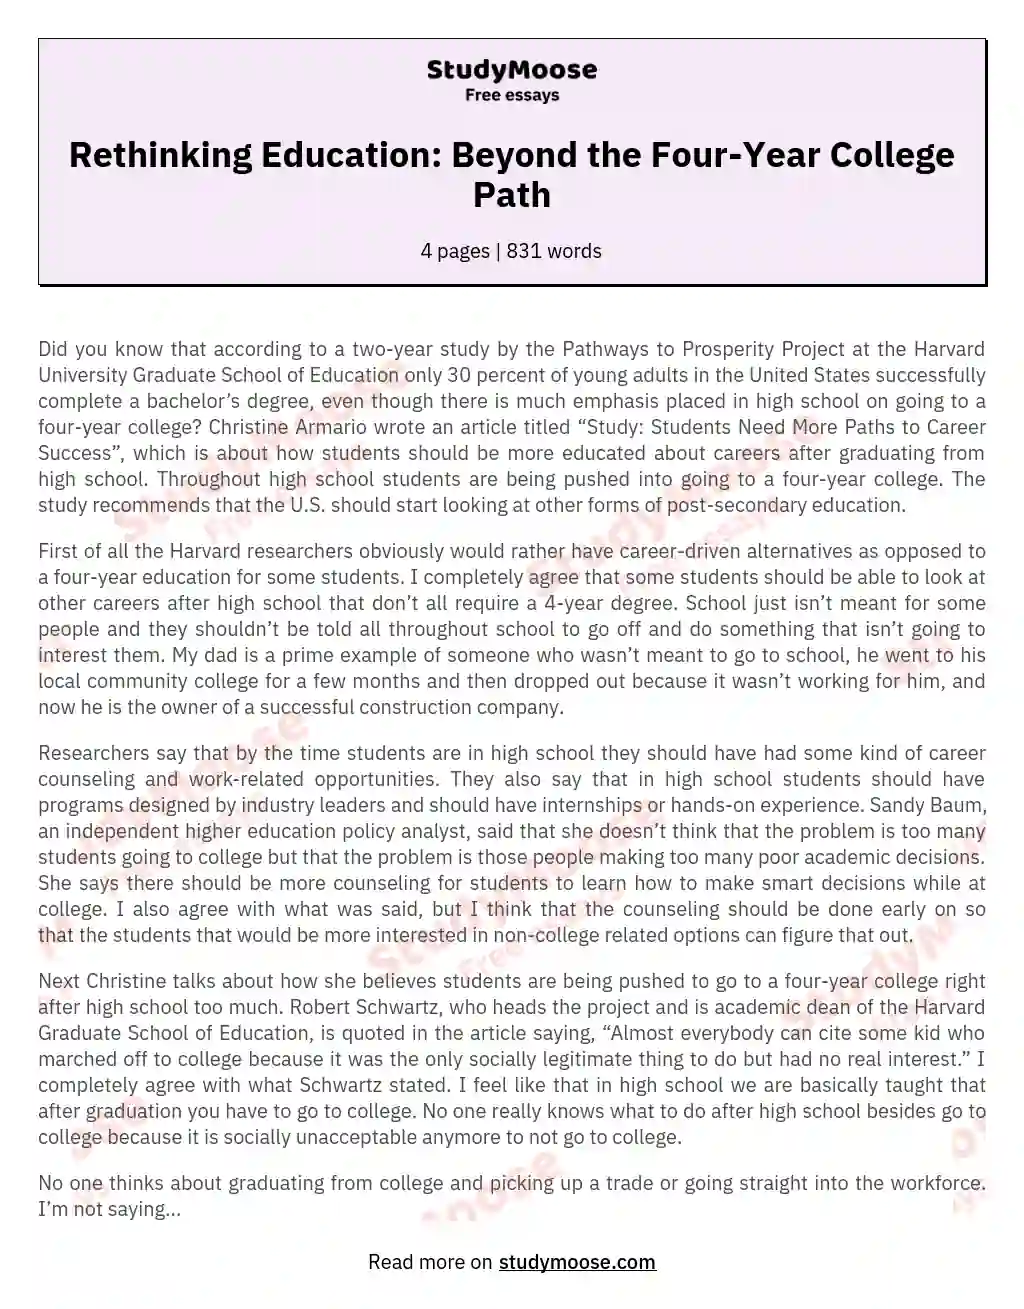 Rethinking Education: Beyond the Four-Year College Path essay